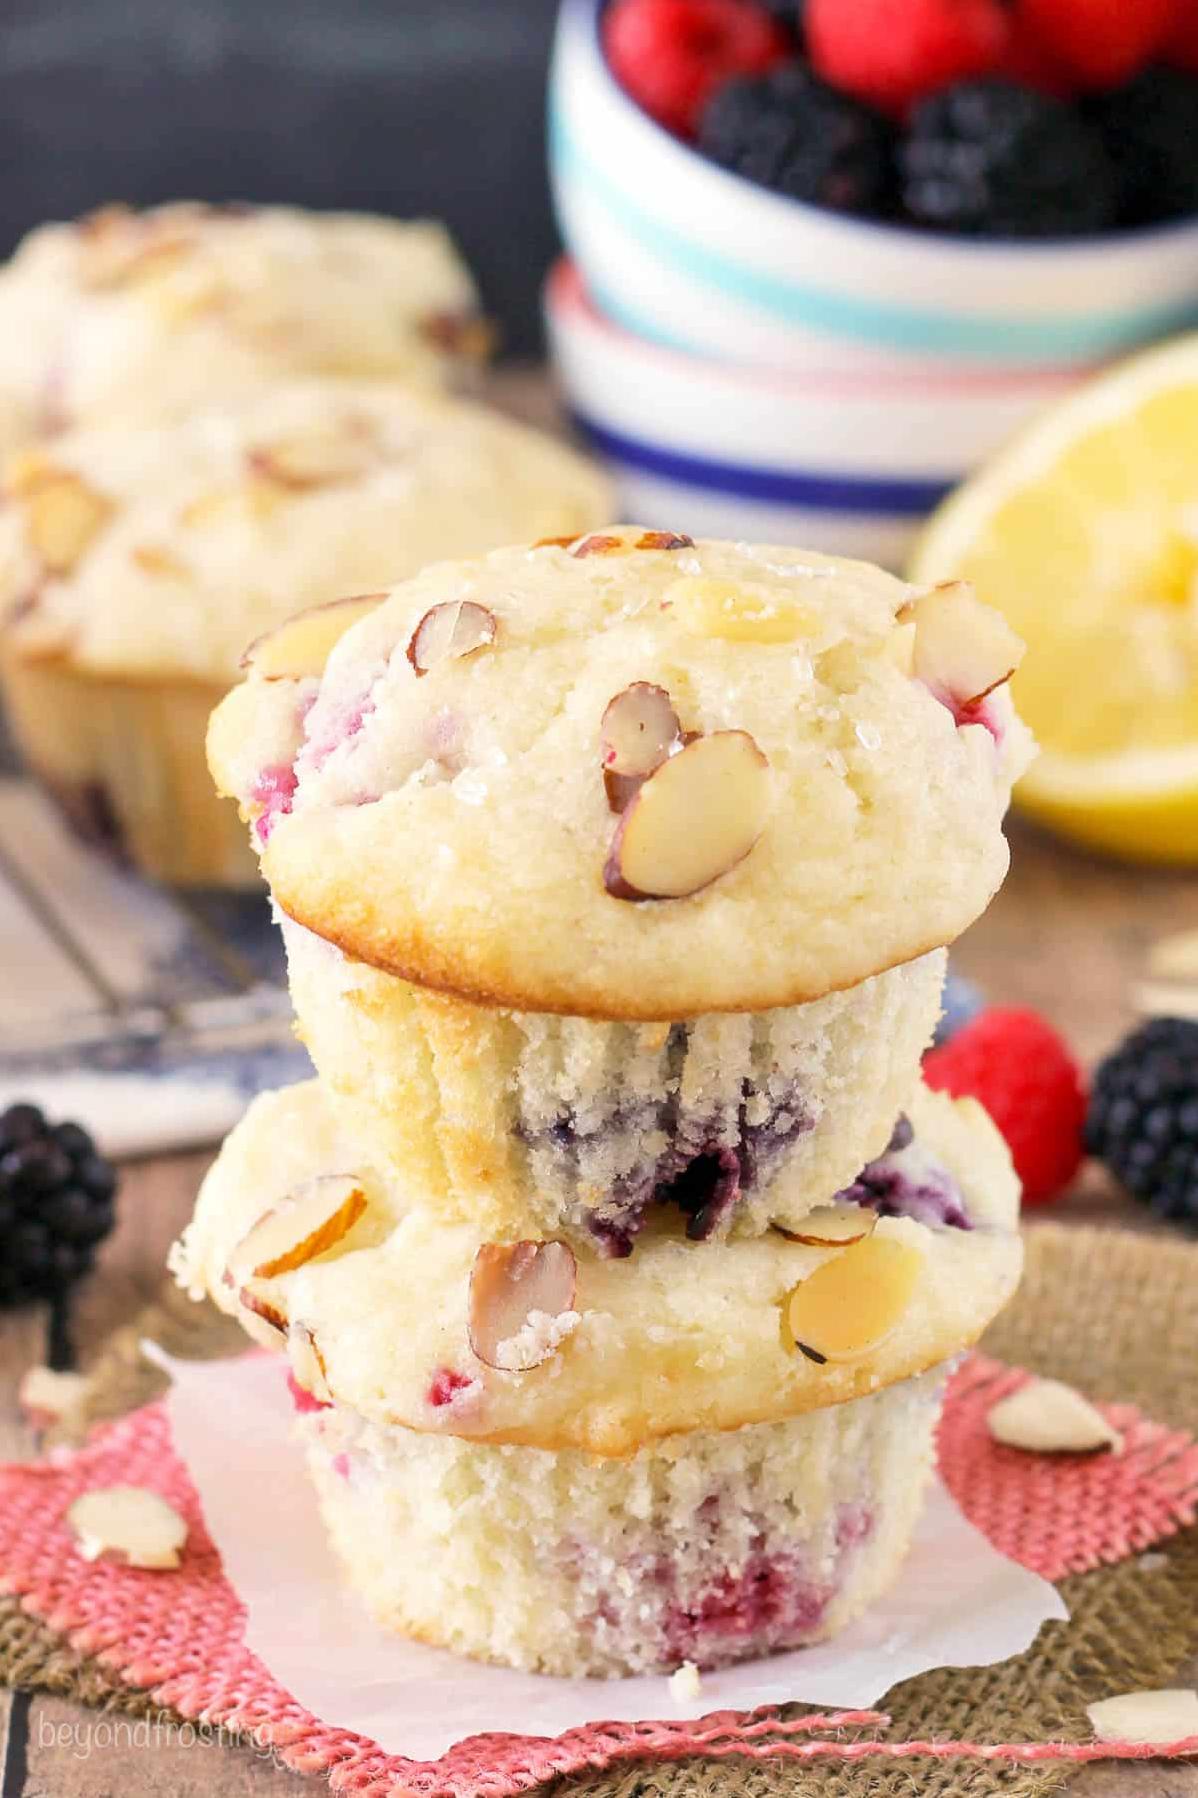  Tart and tangy, these muffins are lemon-raspberry heaven!